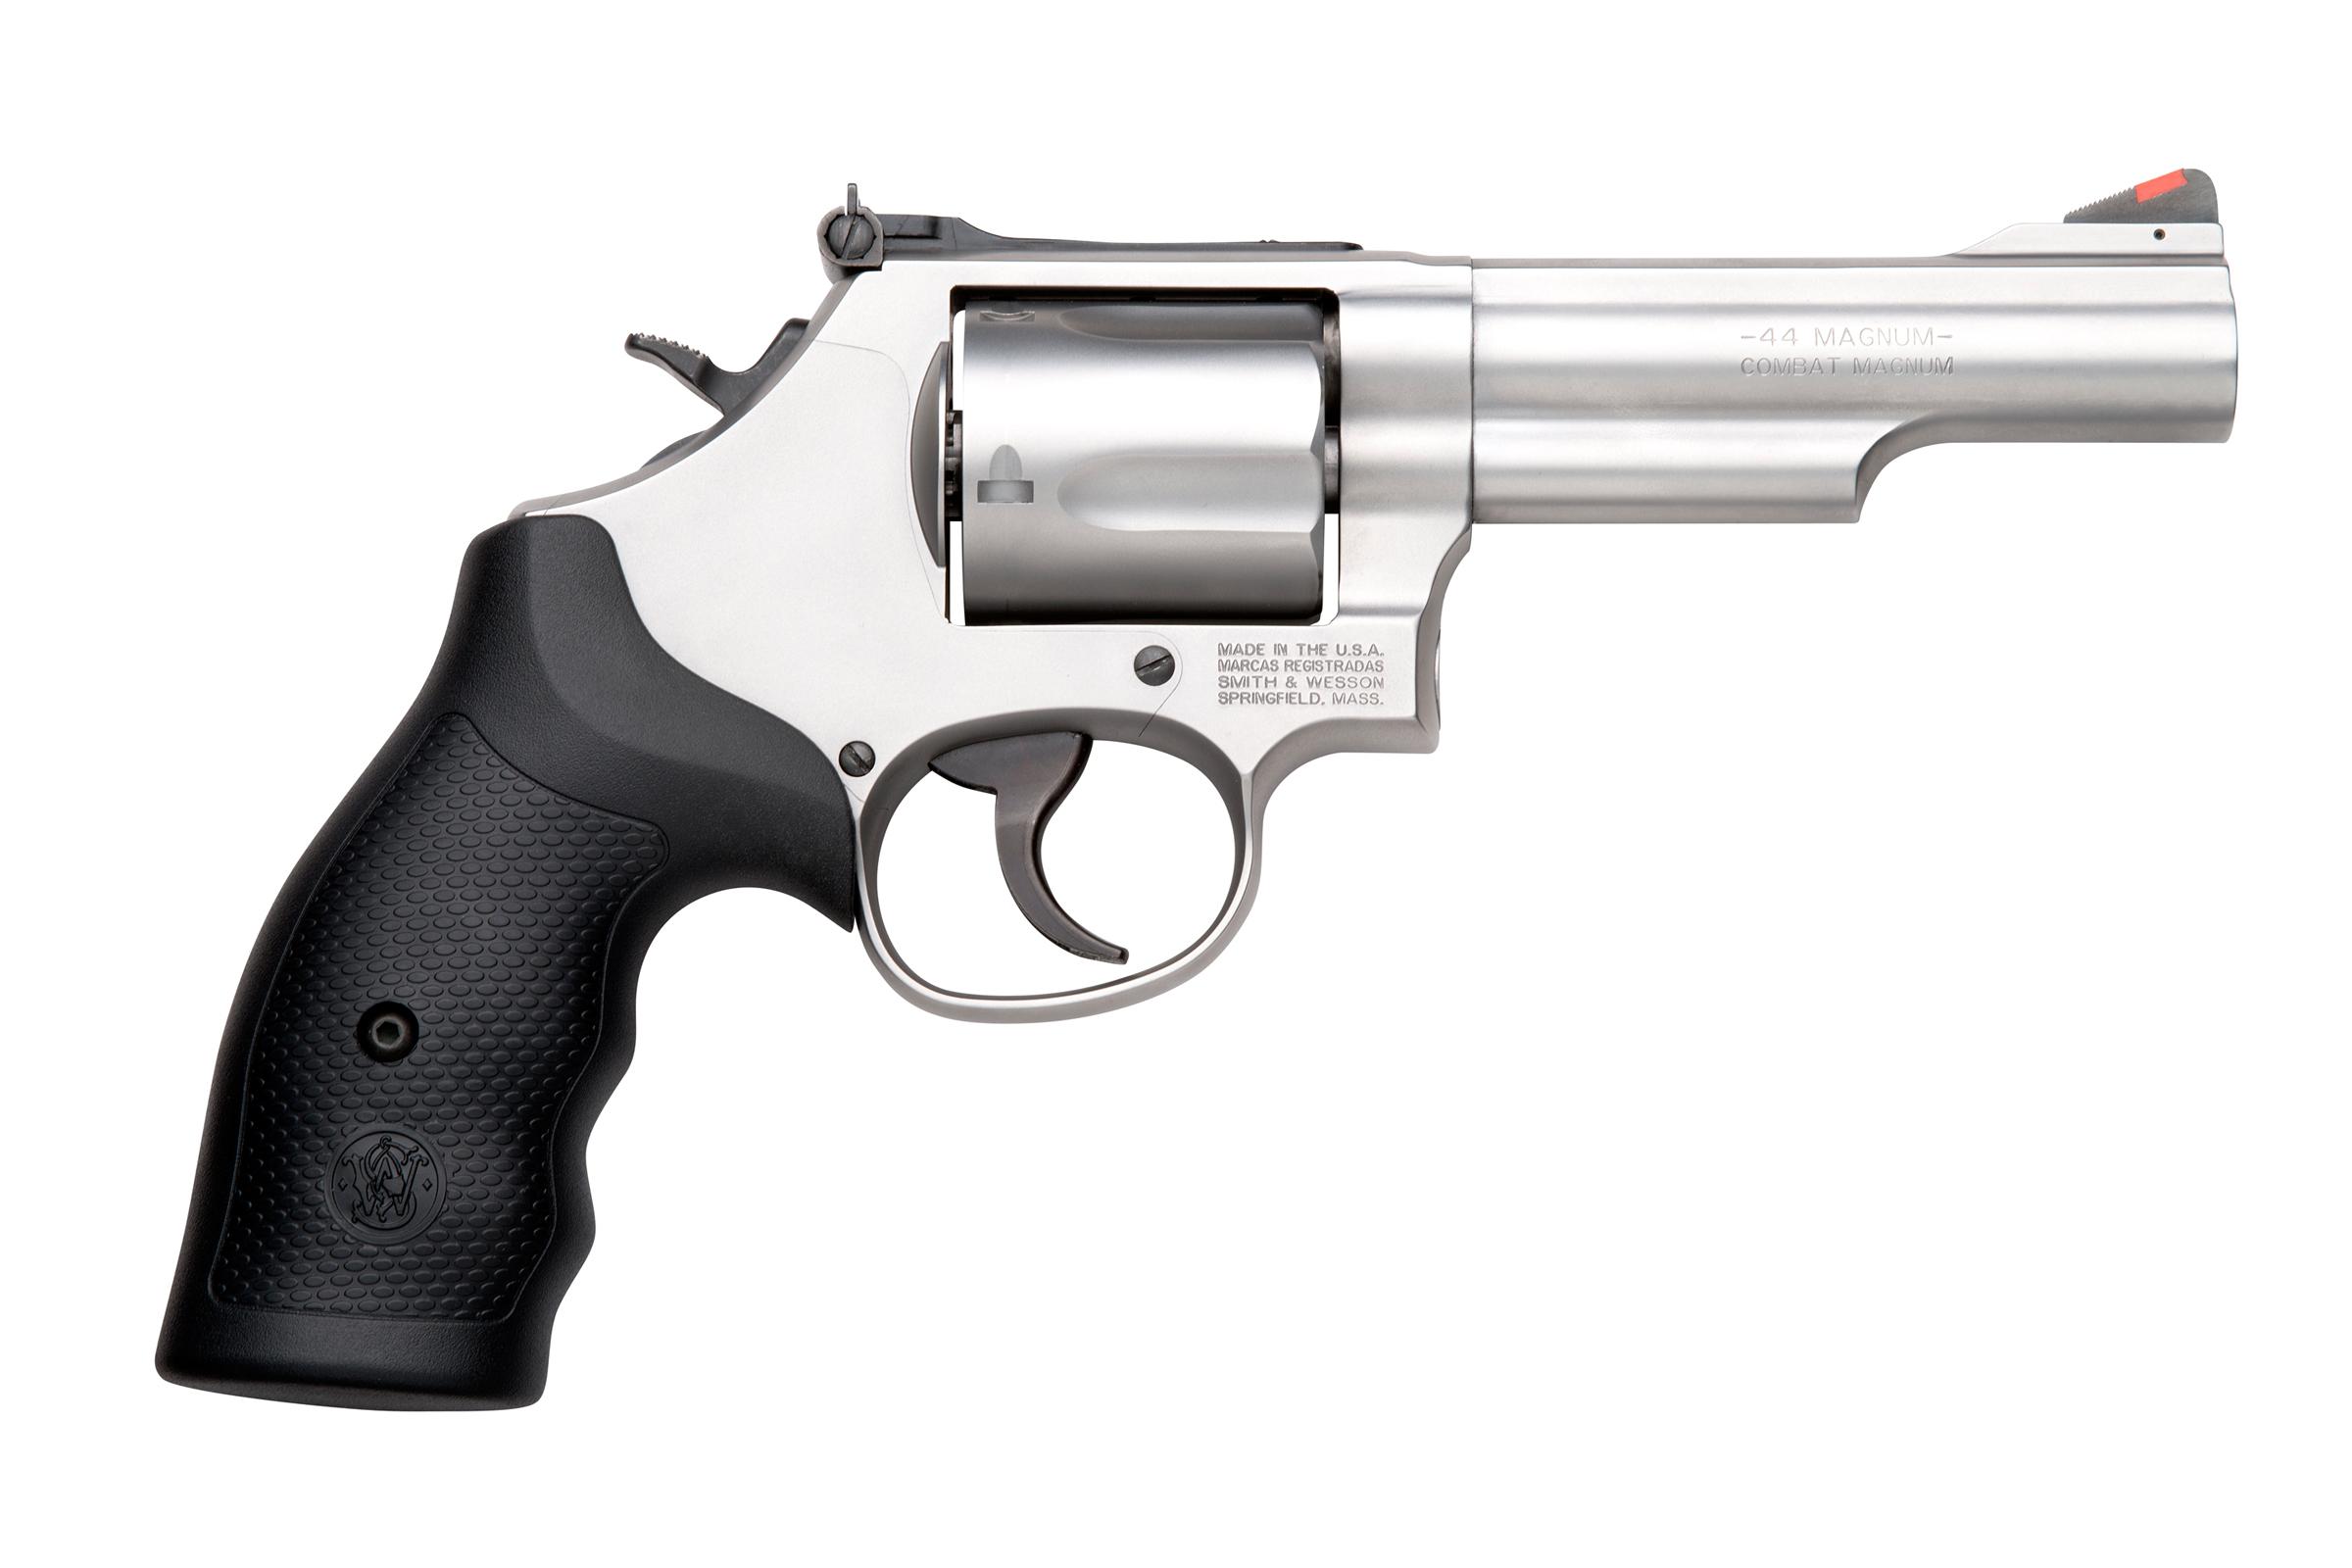  Smith & Wesson 69 4.25 